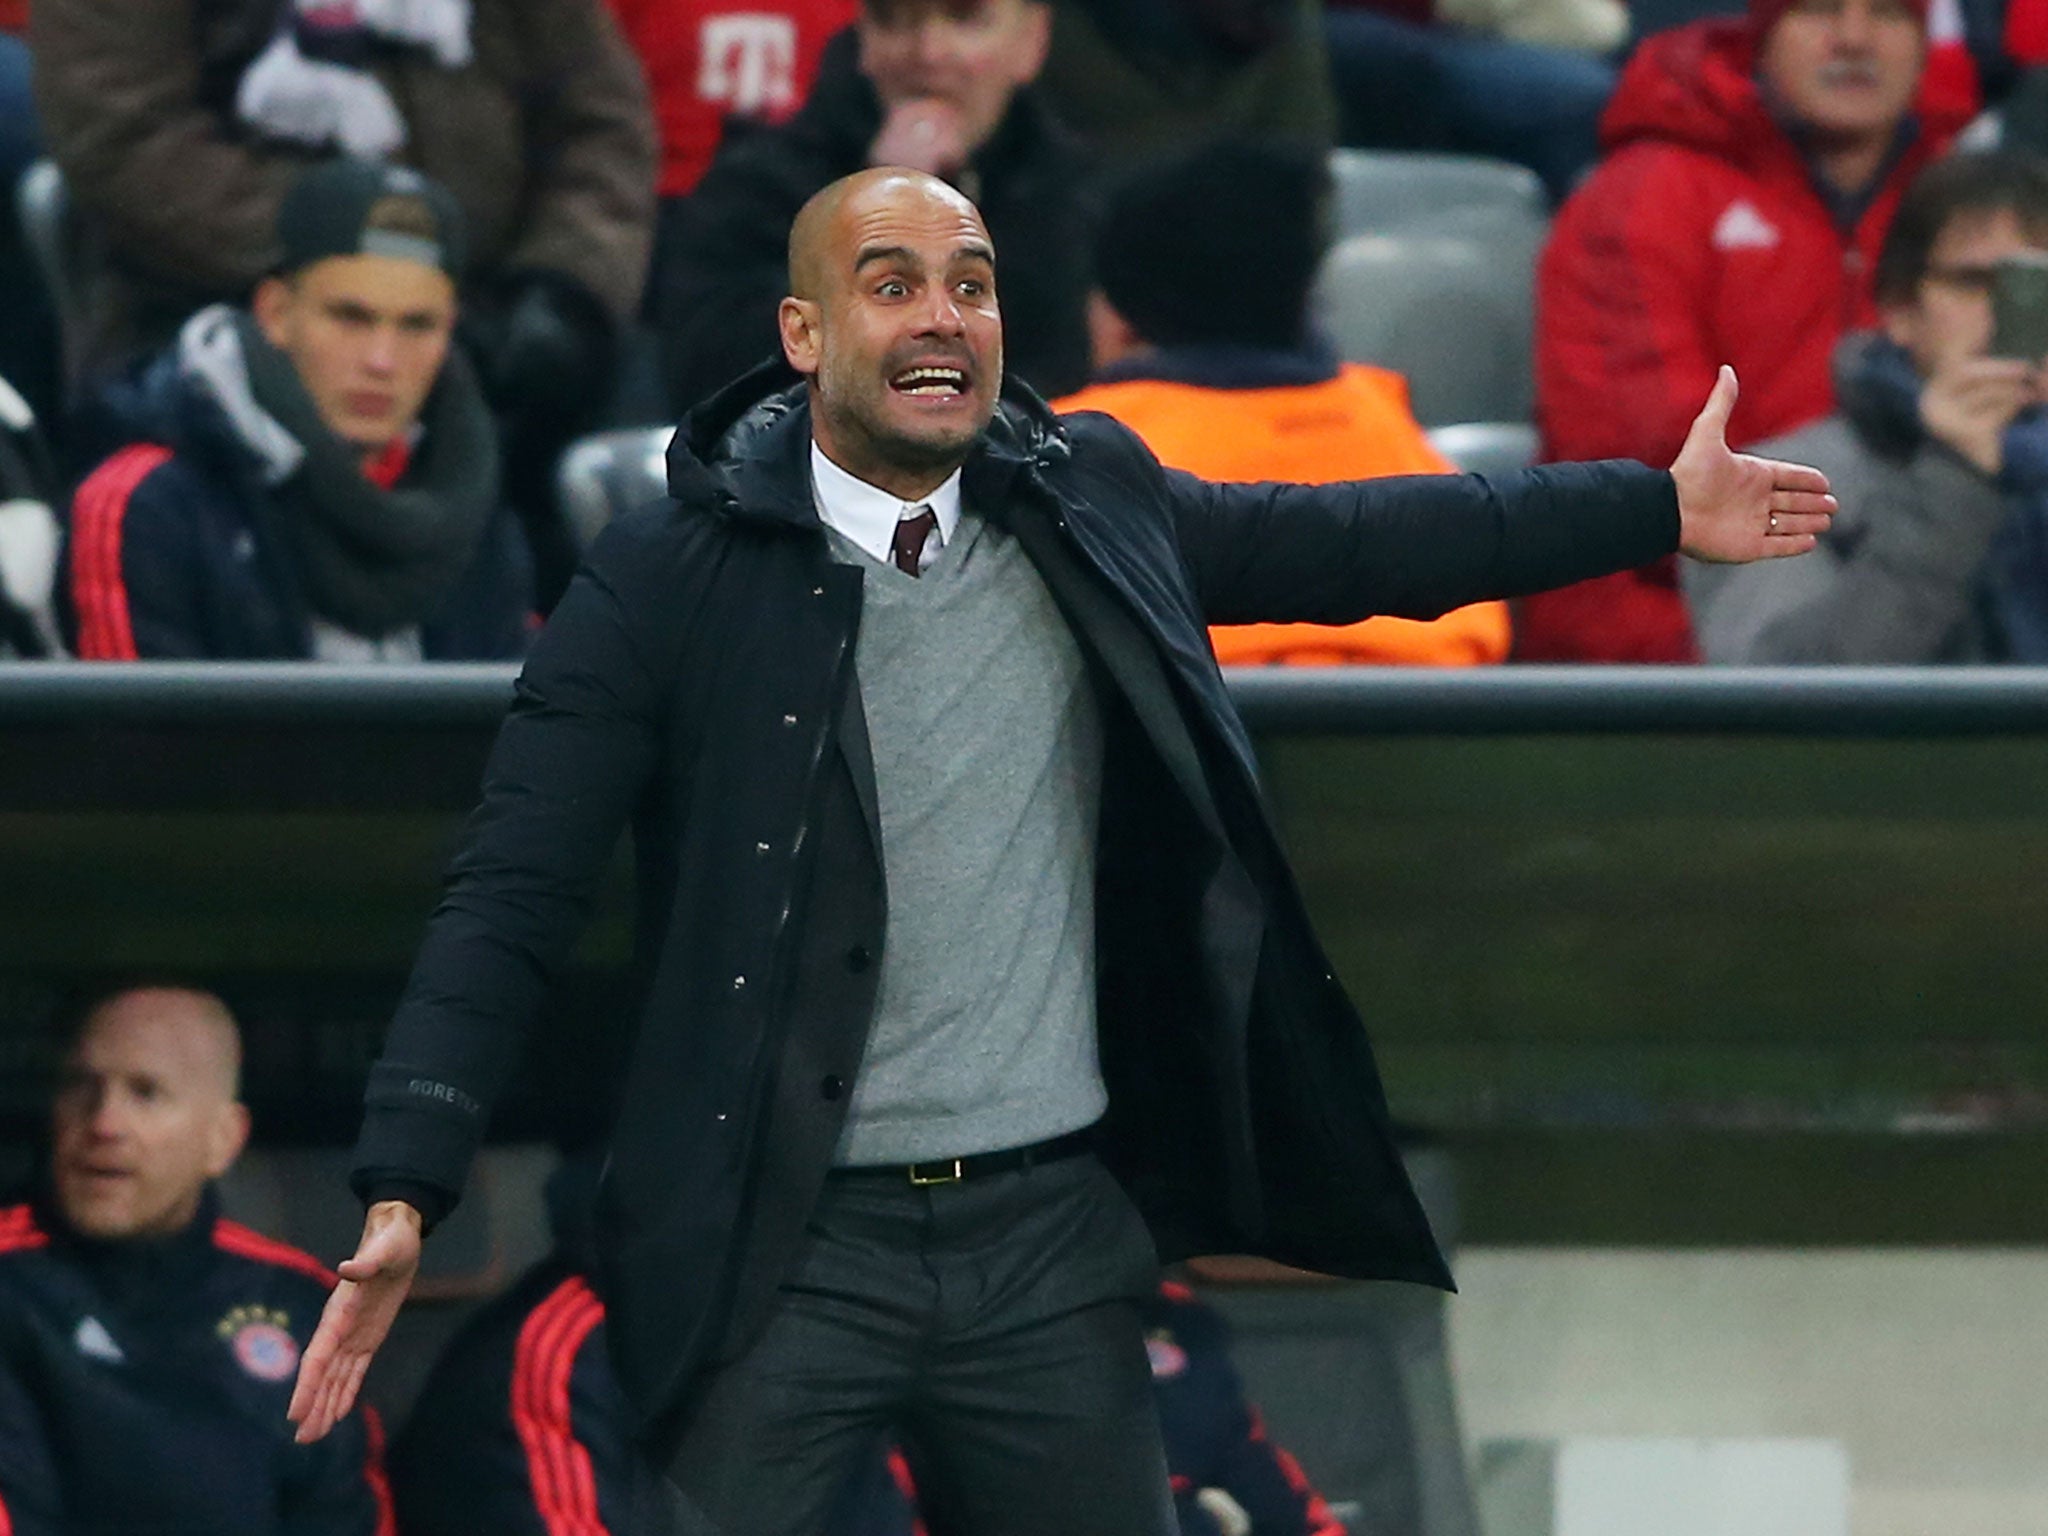 Bayern Munich manager Pep Guardiola is out of contract at the end of the season